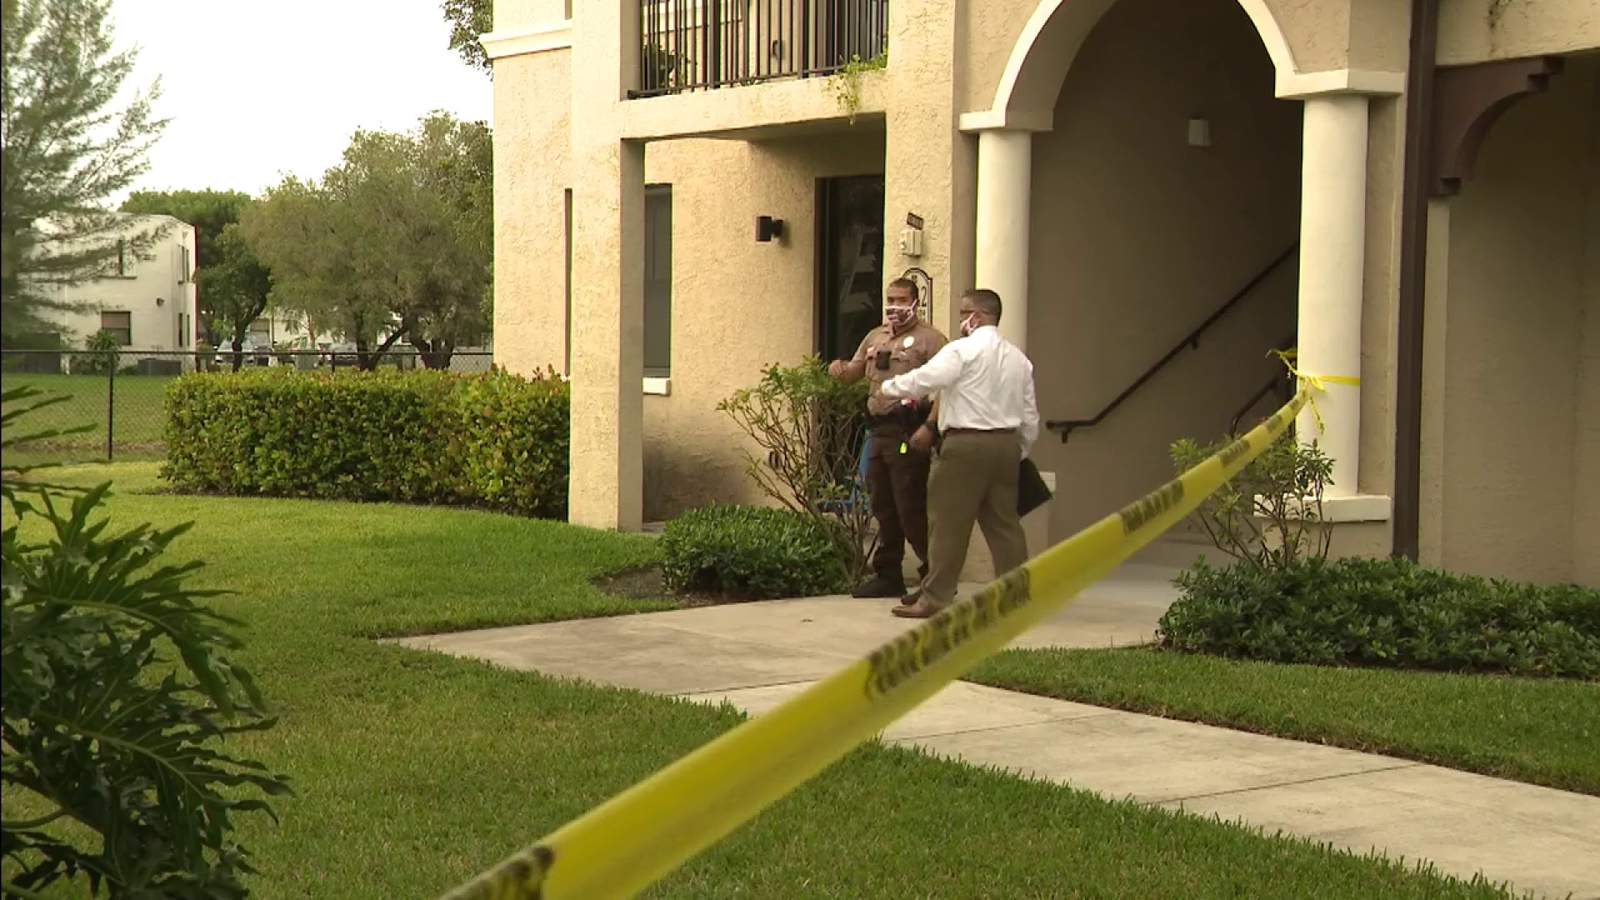 Miami-Dade apartment shooting leaves 1 dead, 1 injured